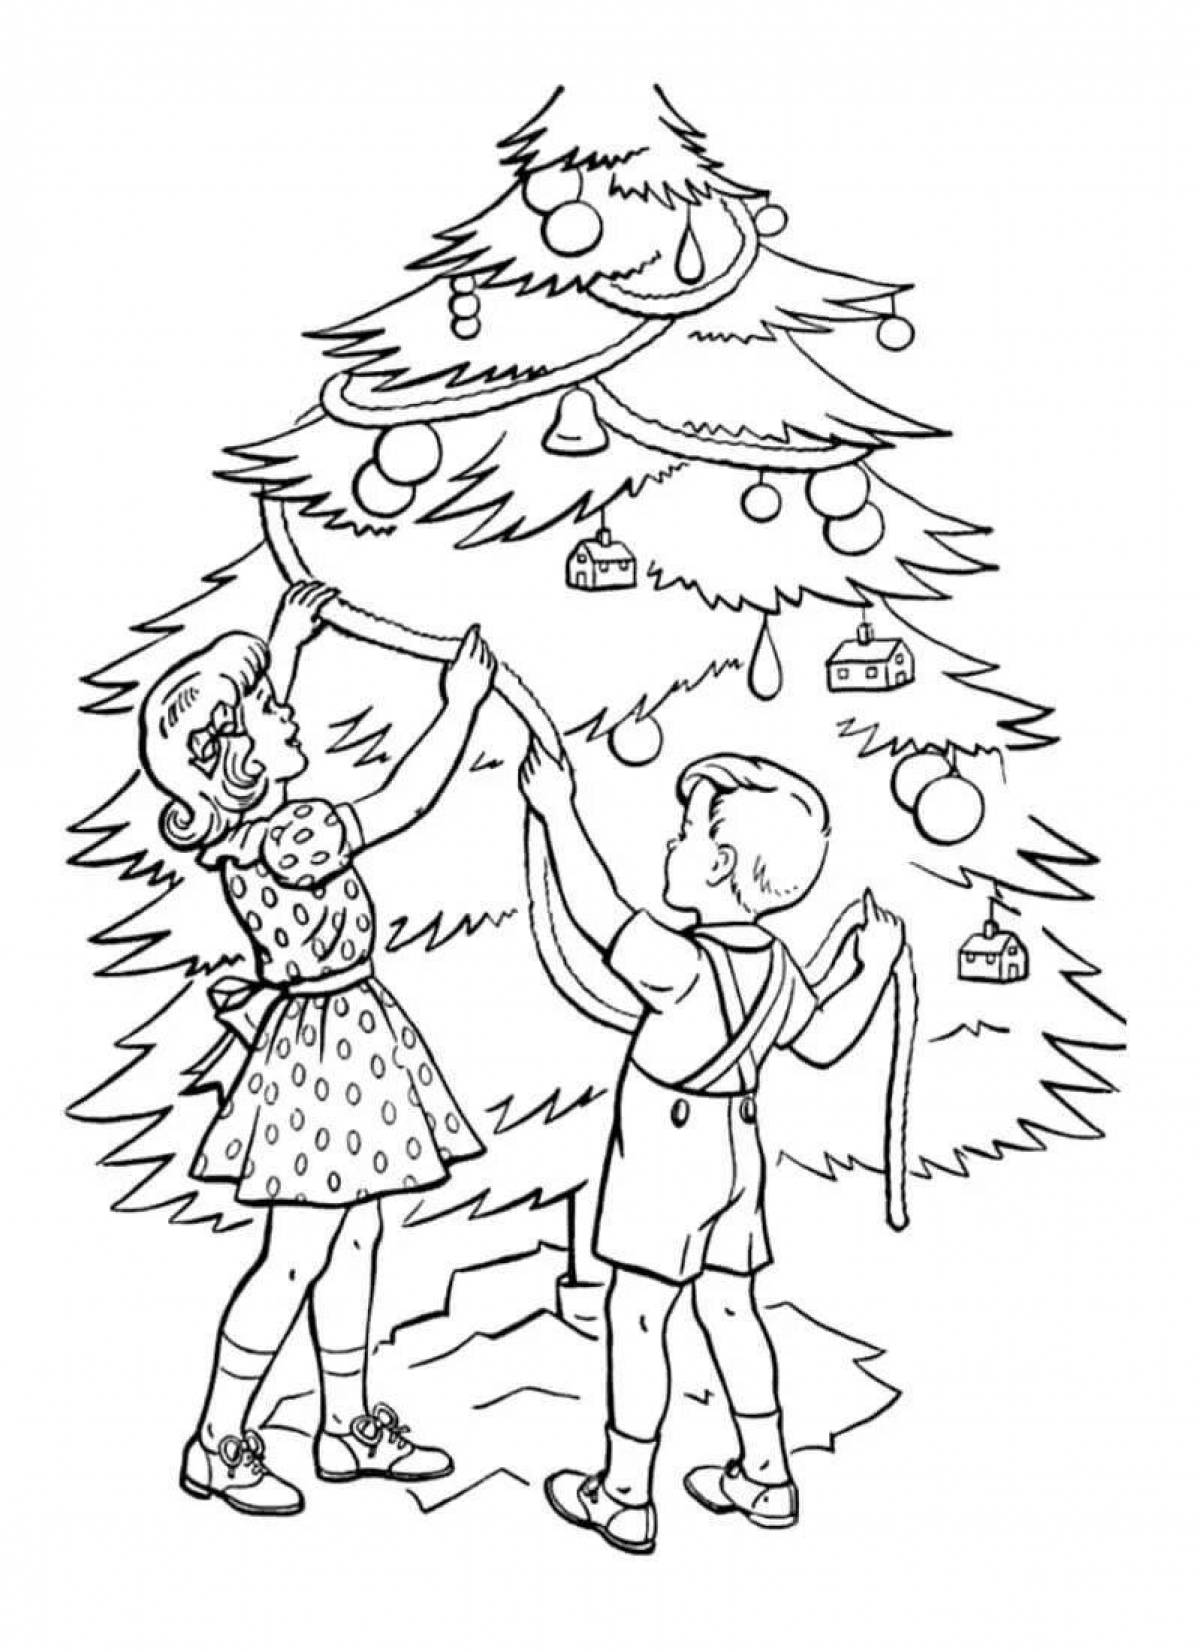 Playful Christmas family coloring book